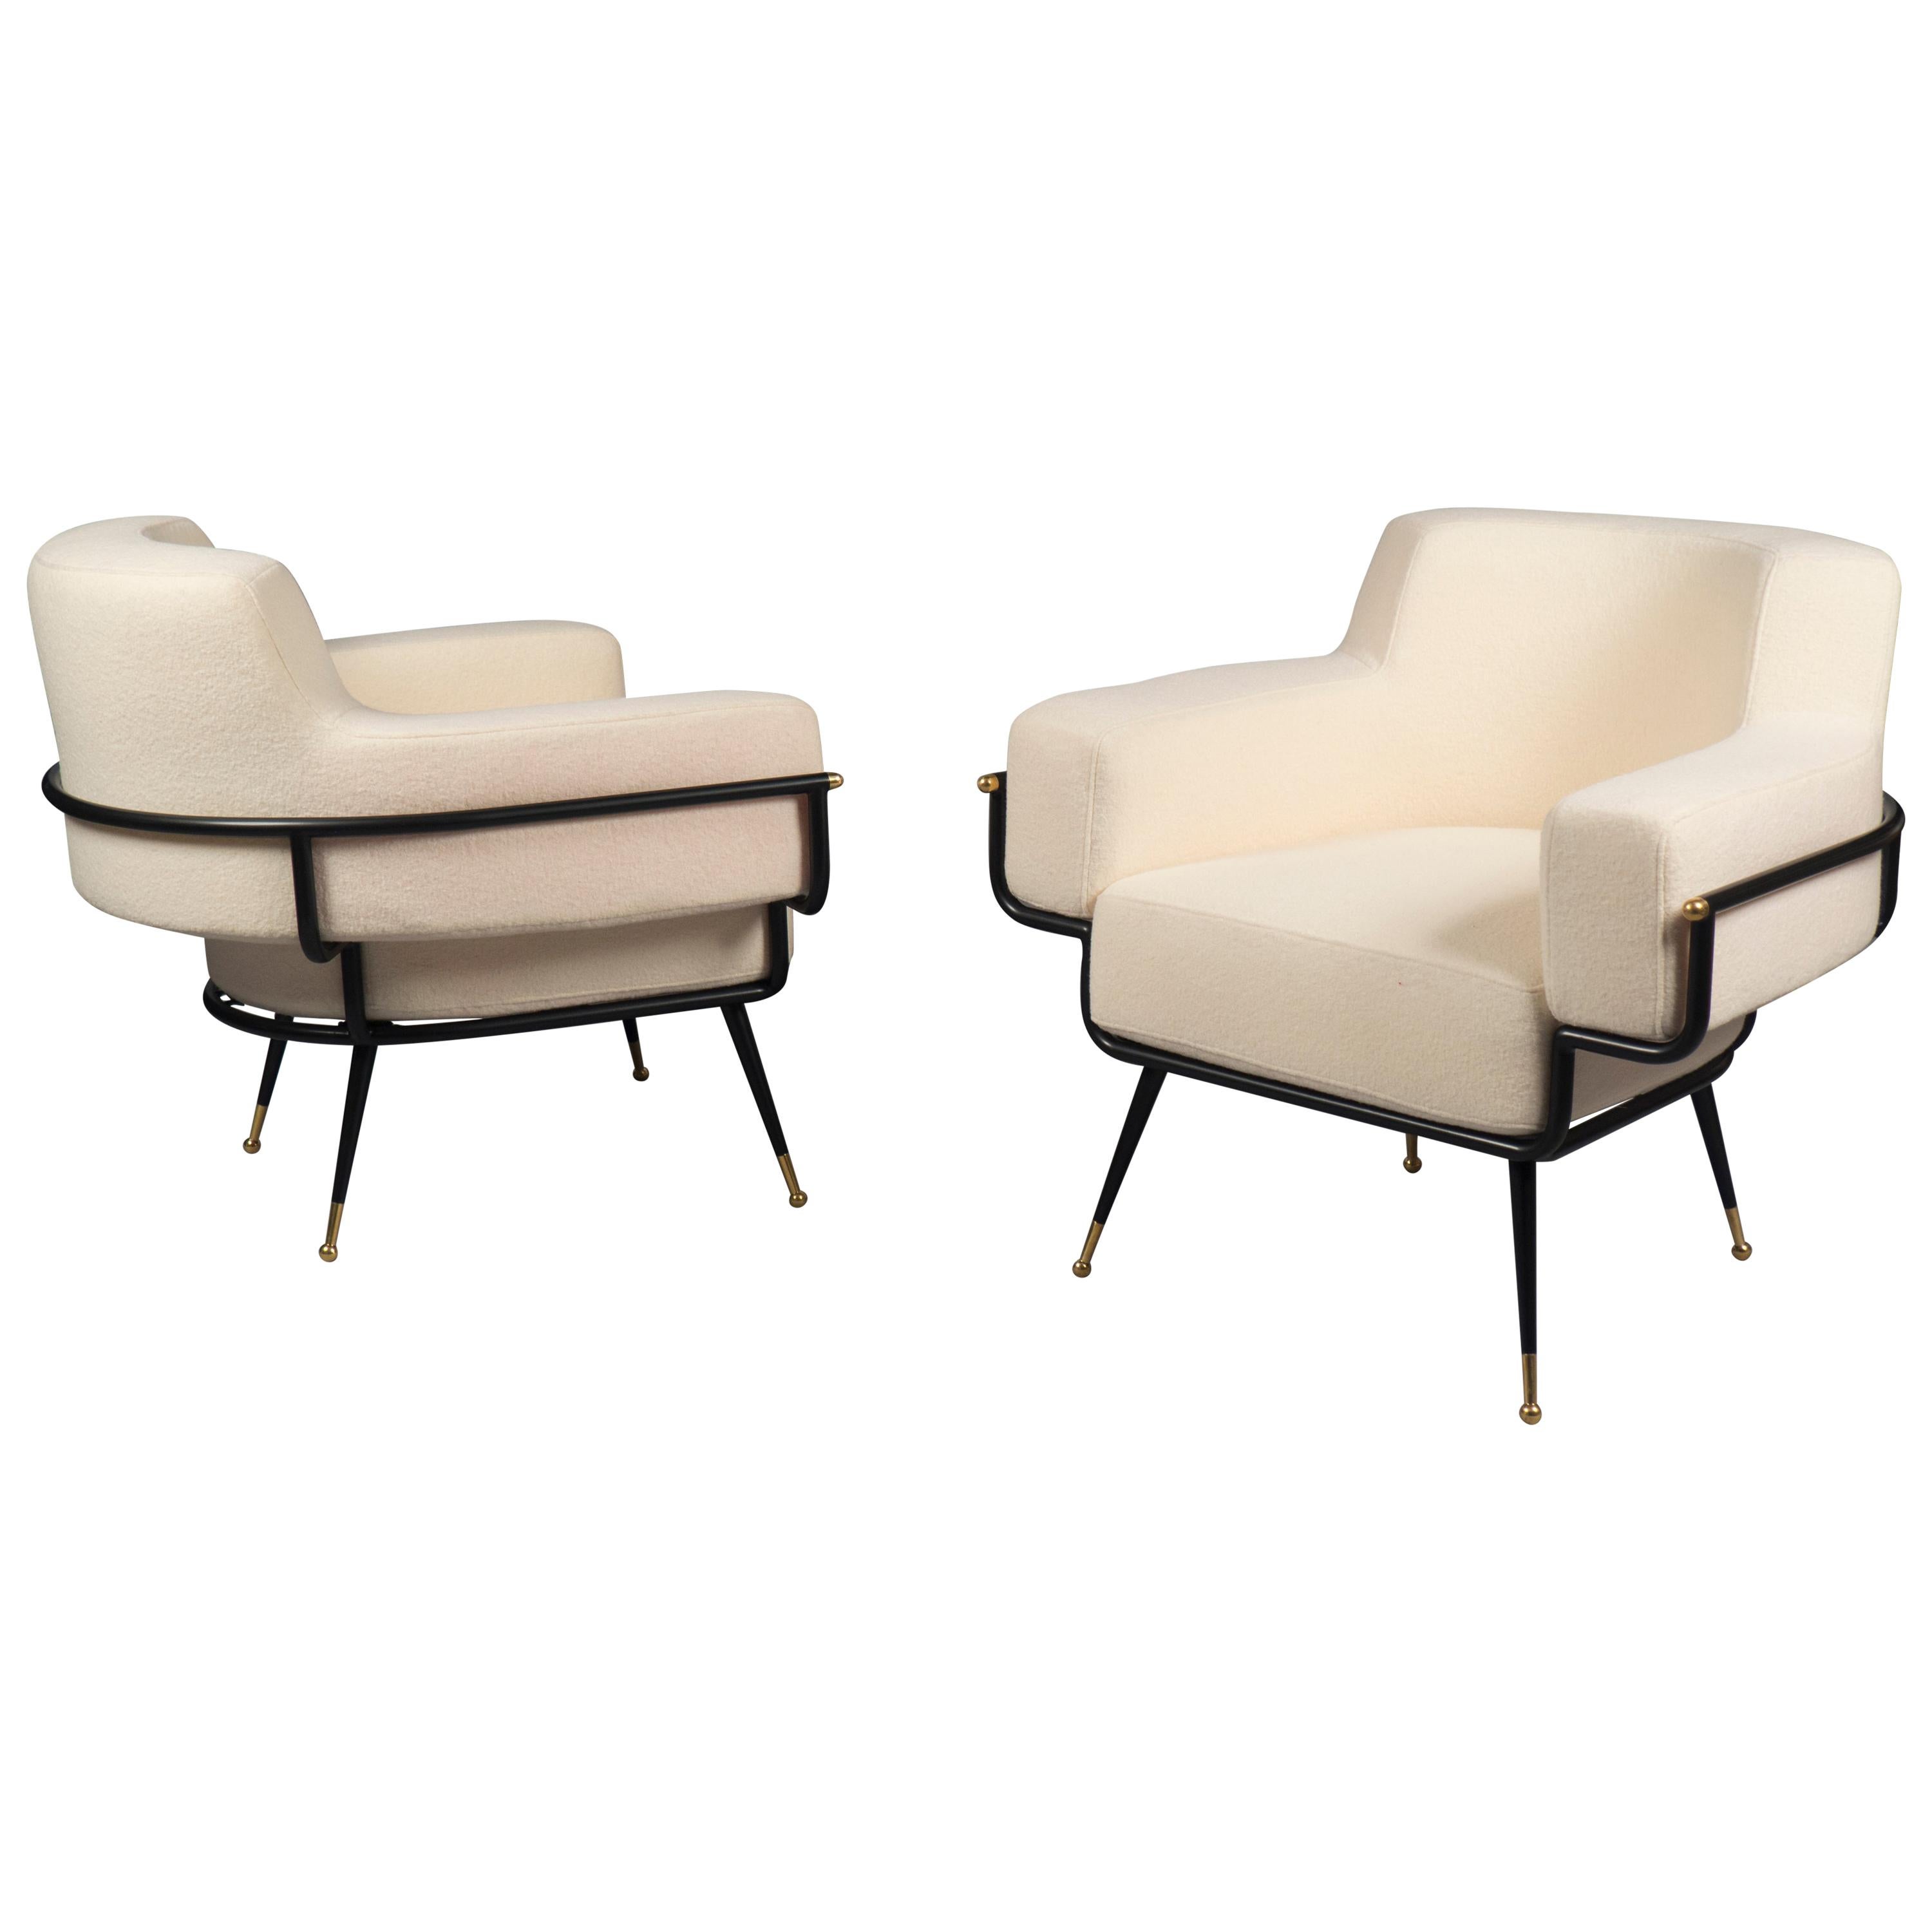 Pair of Armchairs, France, 2019